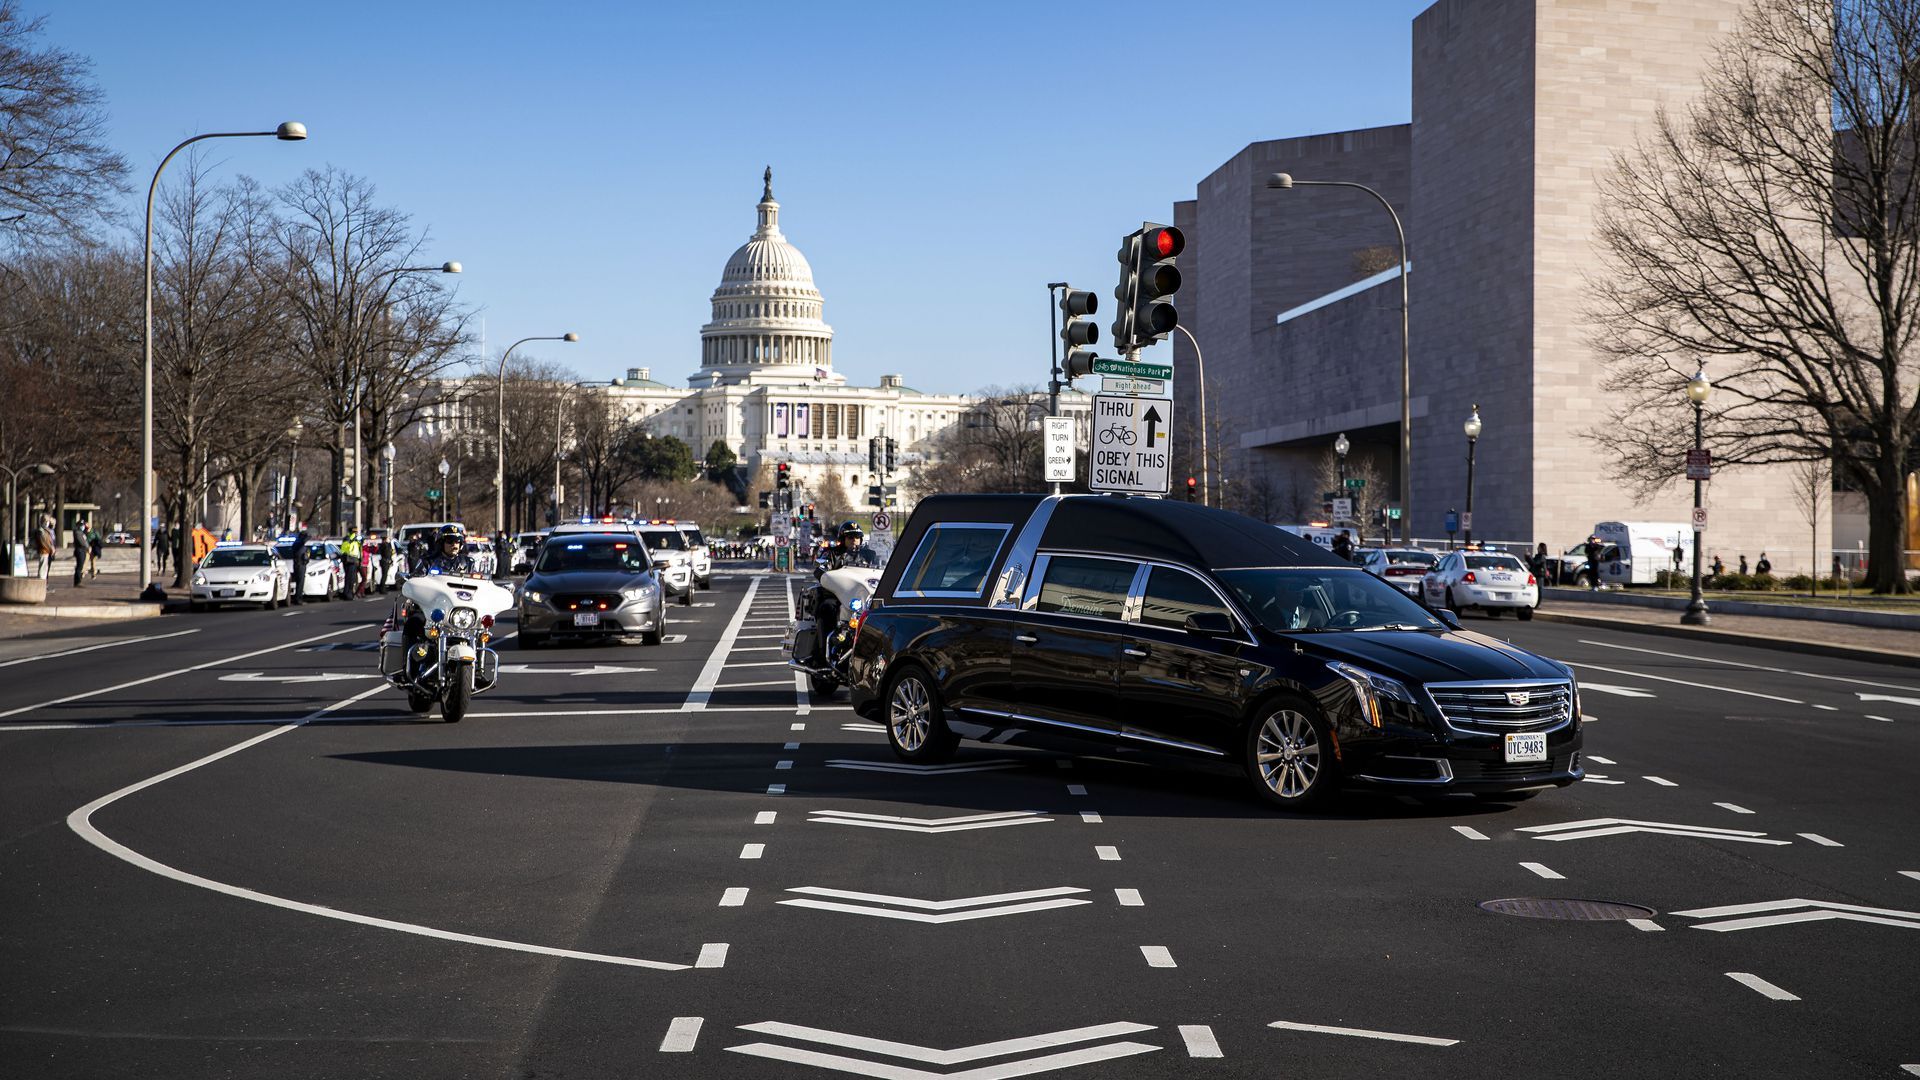 A hearse carrying the casket of Brian Sicknick, the Capitol Police officer who died from injuries following the siege